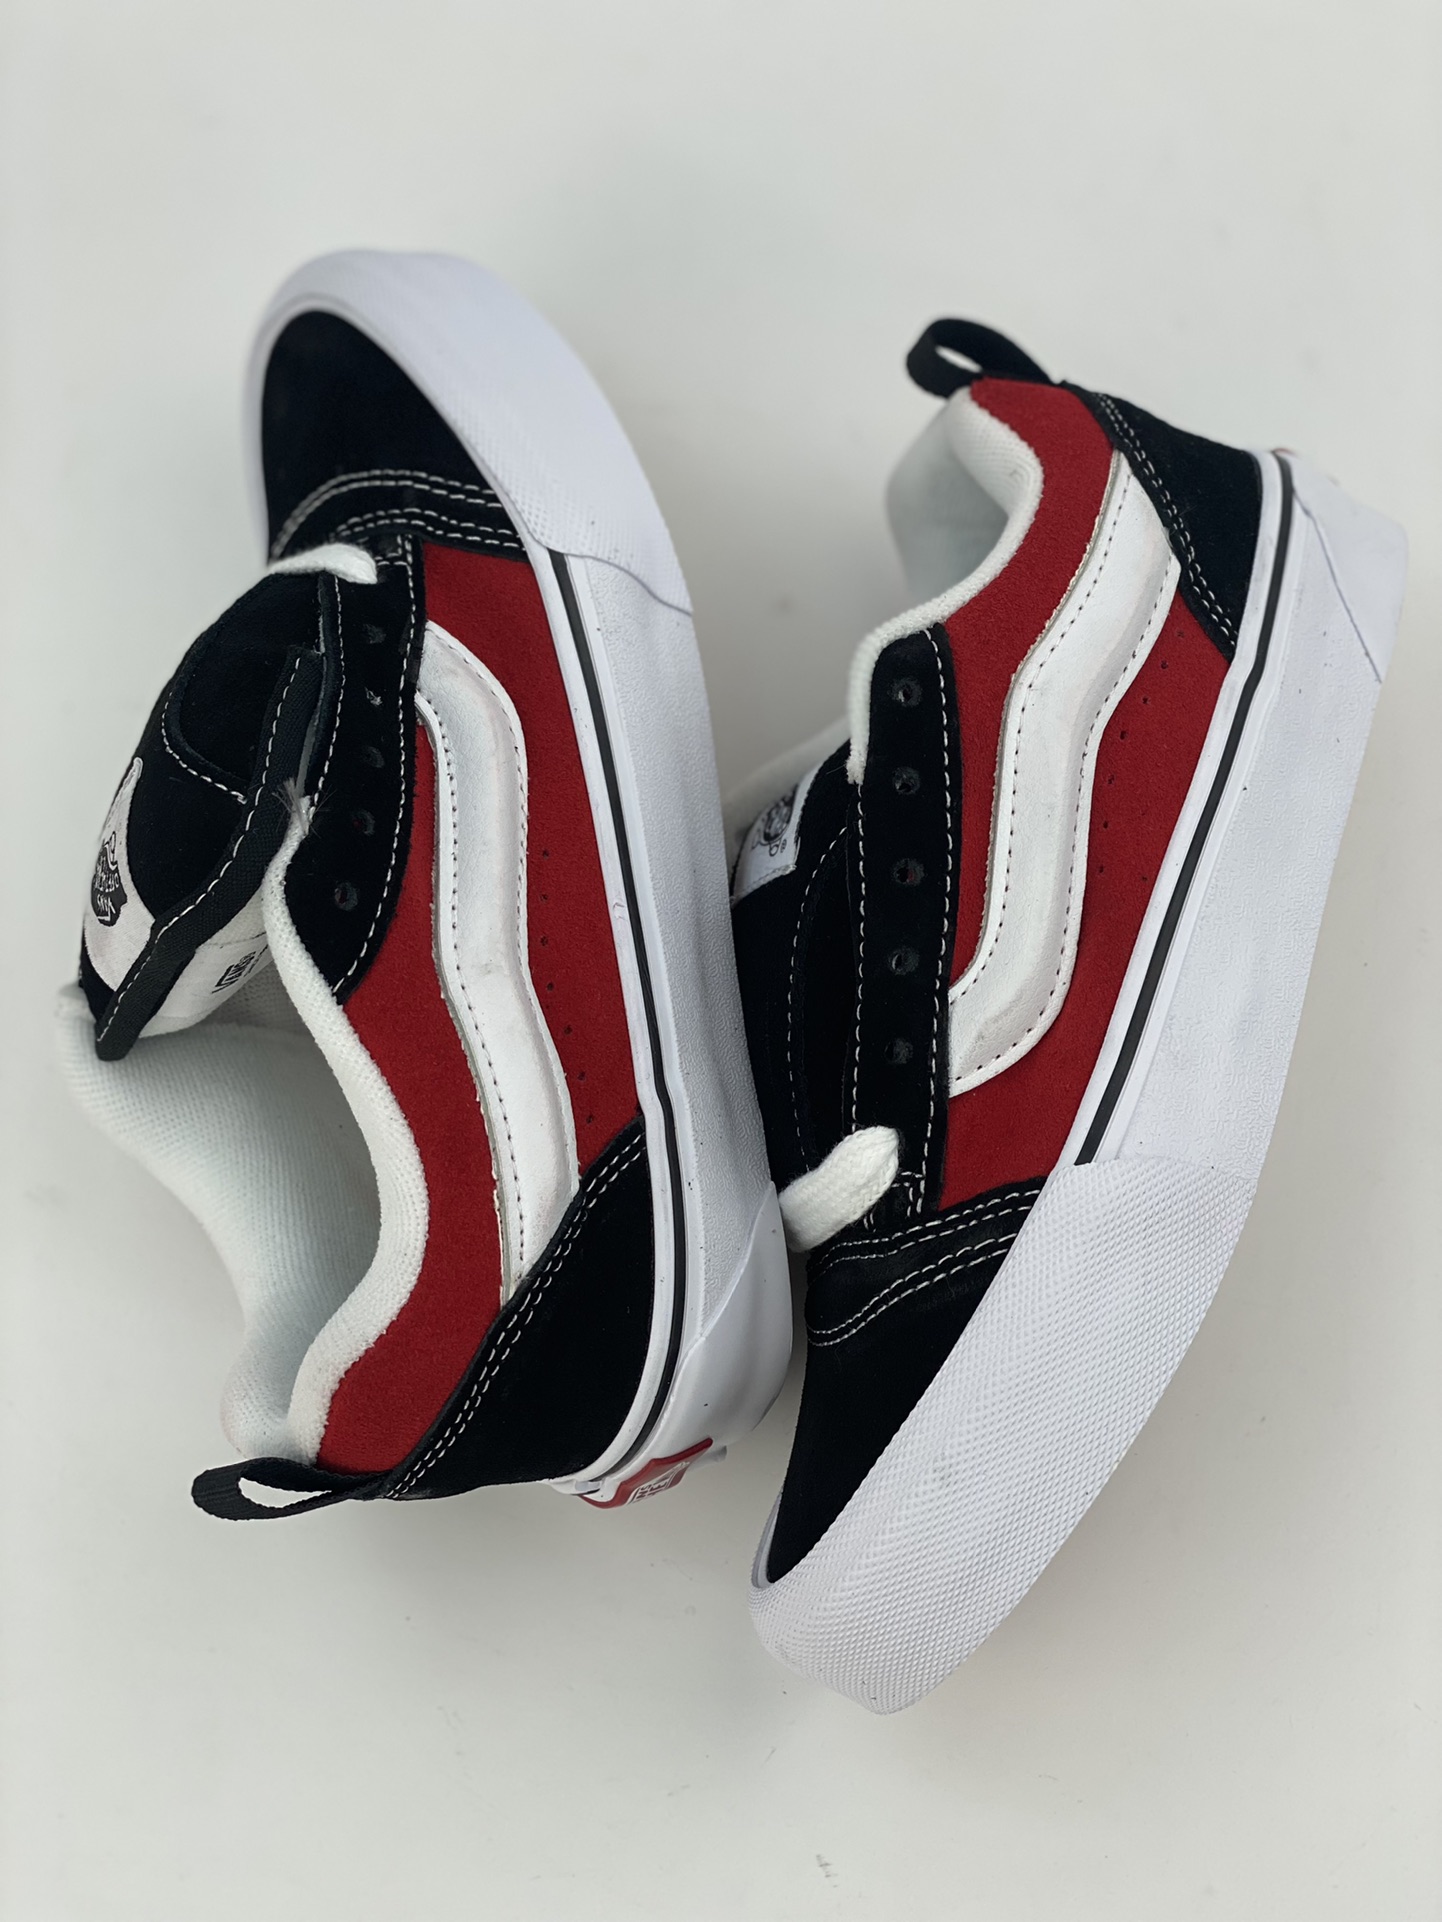 Vans official Knu Skool black and red contrasting American classic color matching men's and women's shoes